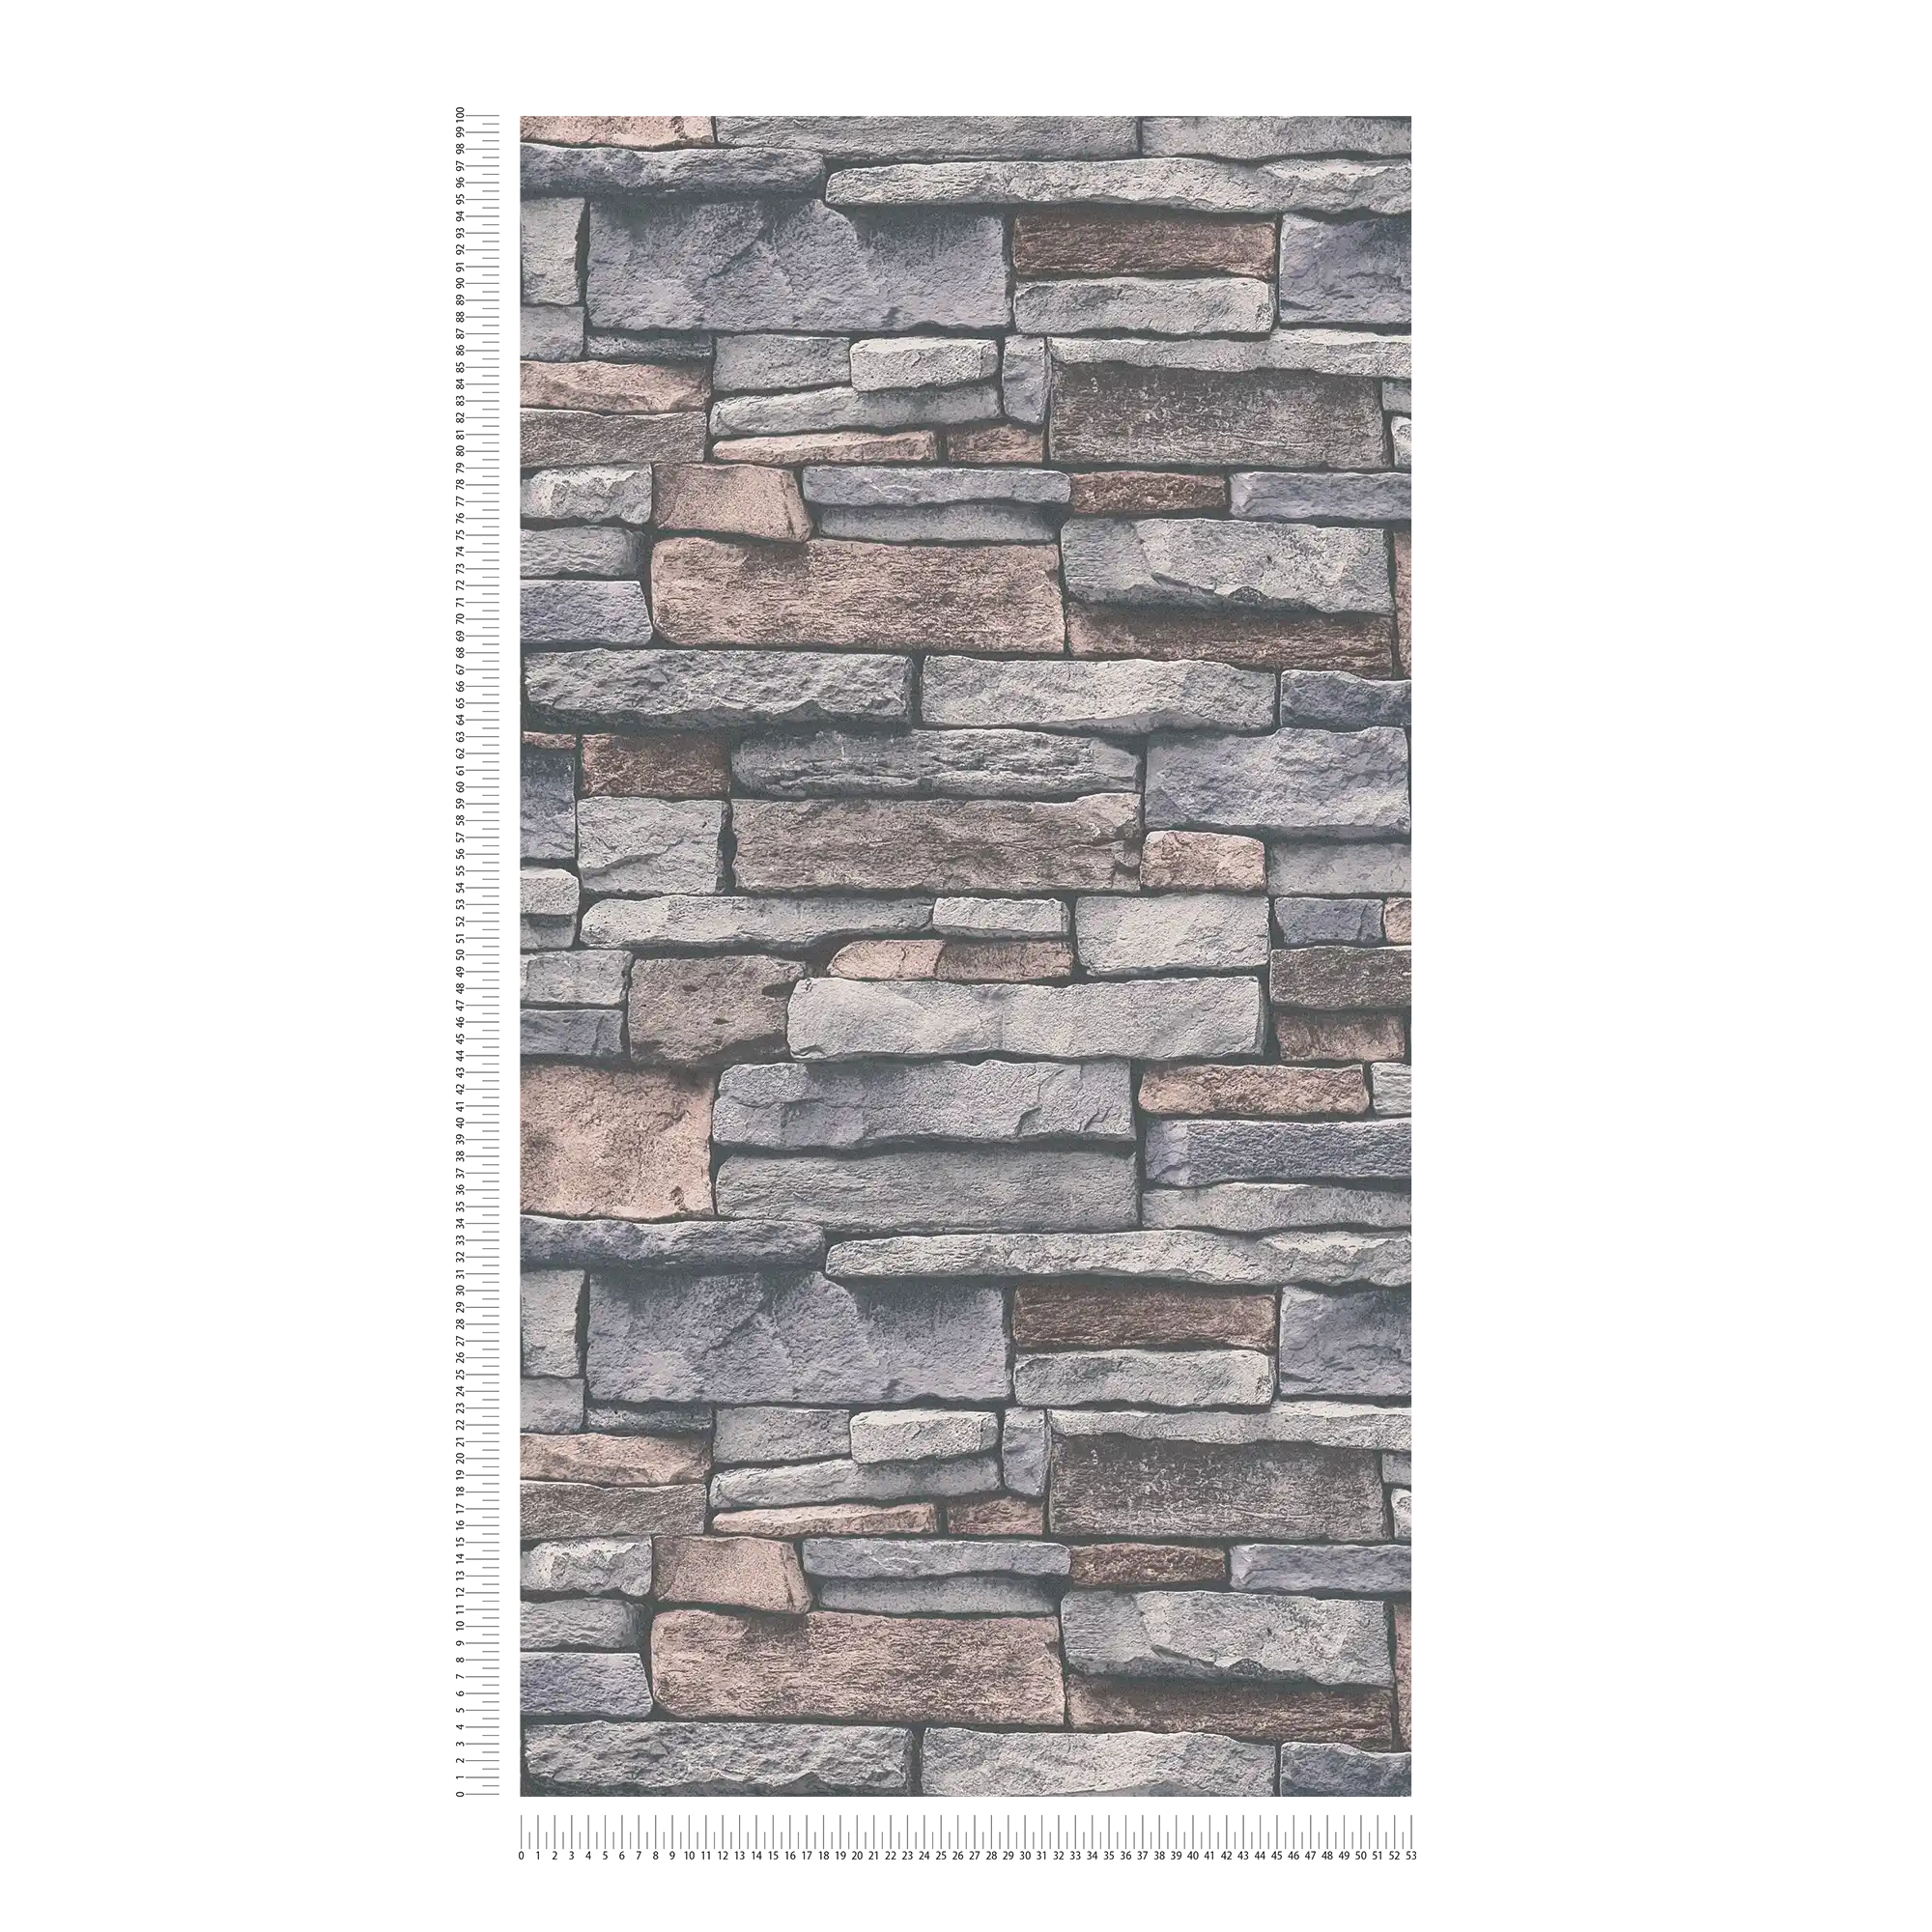             Non-woven wallpaper in stone look with natural stone wall - grey, beige, brown
        